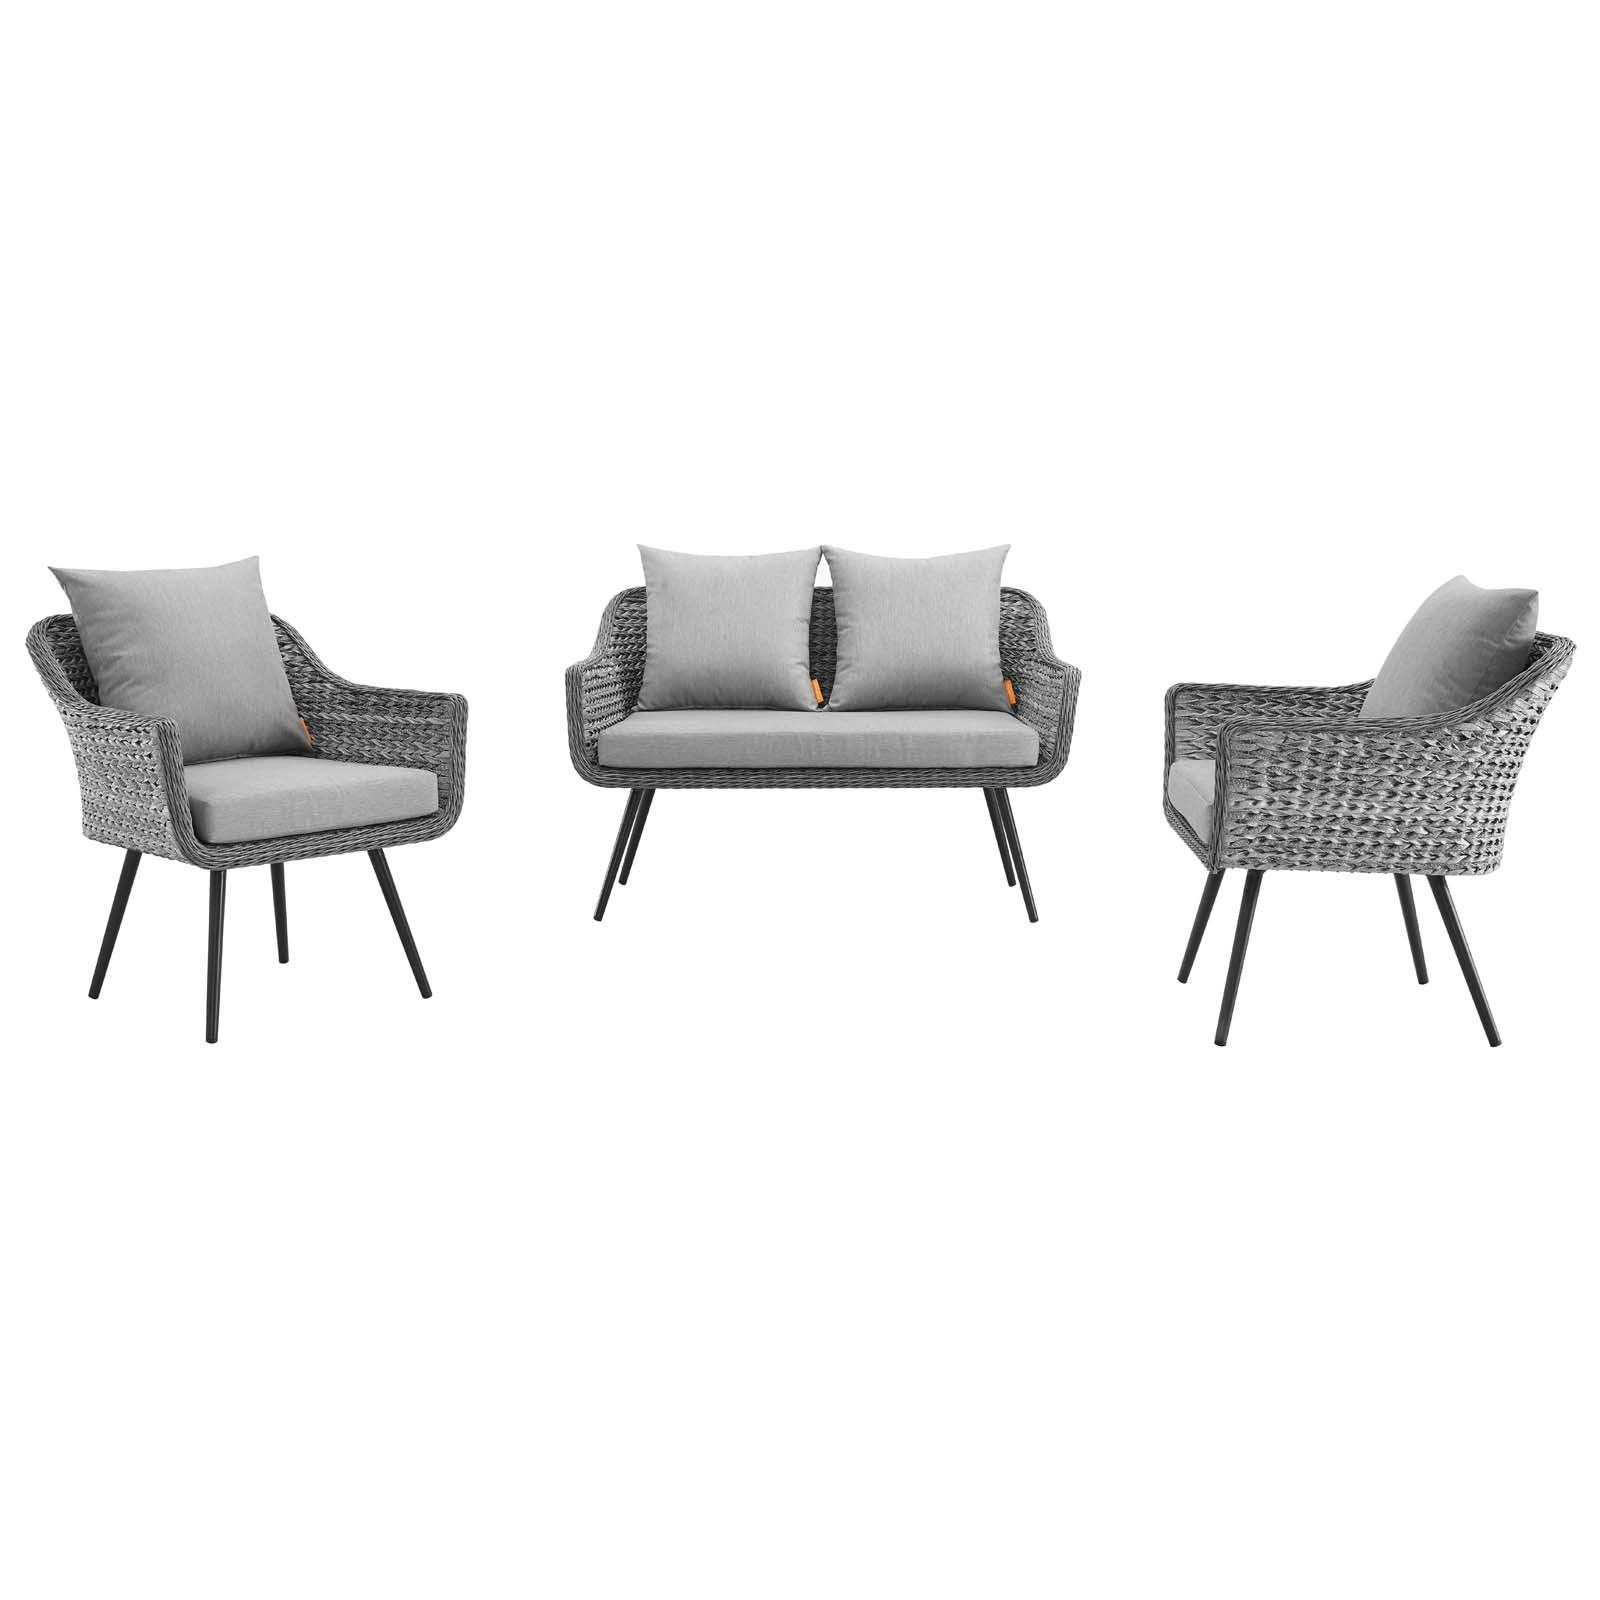 Modway Endeavor 3 Piece Outdoor Patio Wicker Rattan Loveseat and Armchair Set FredCo